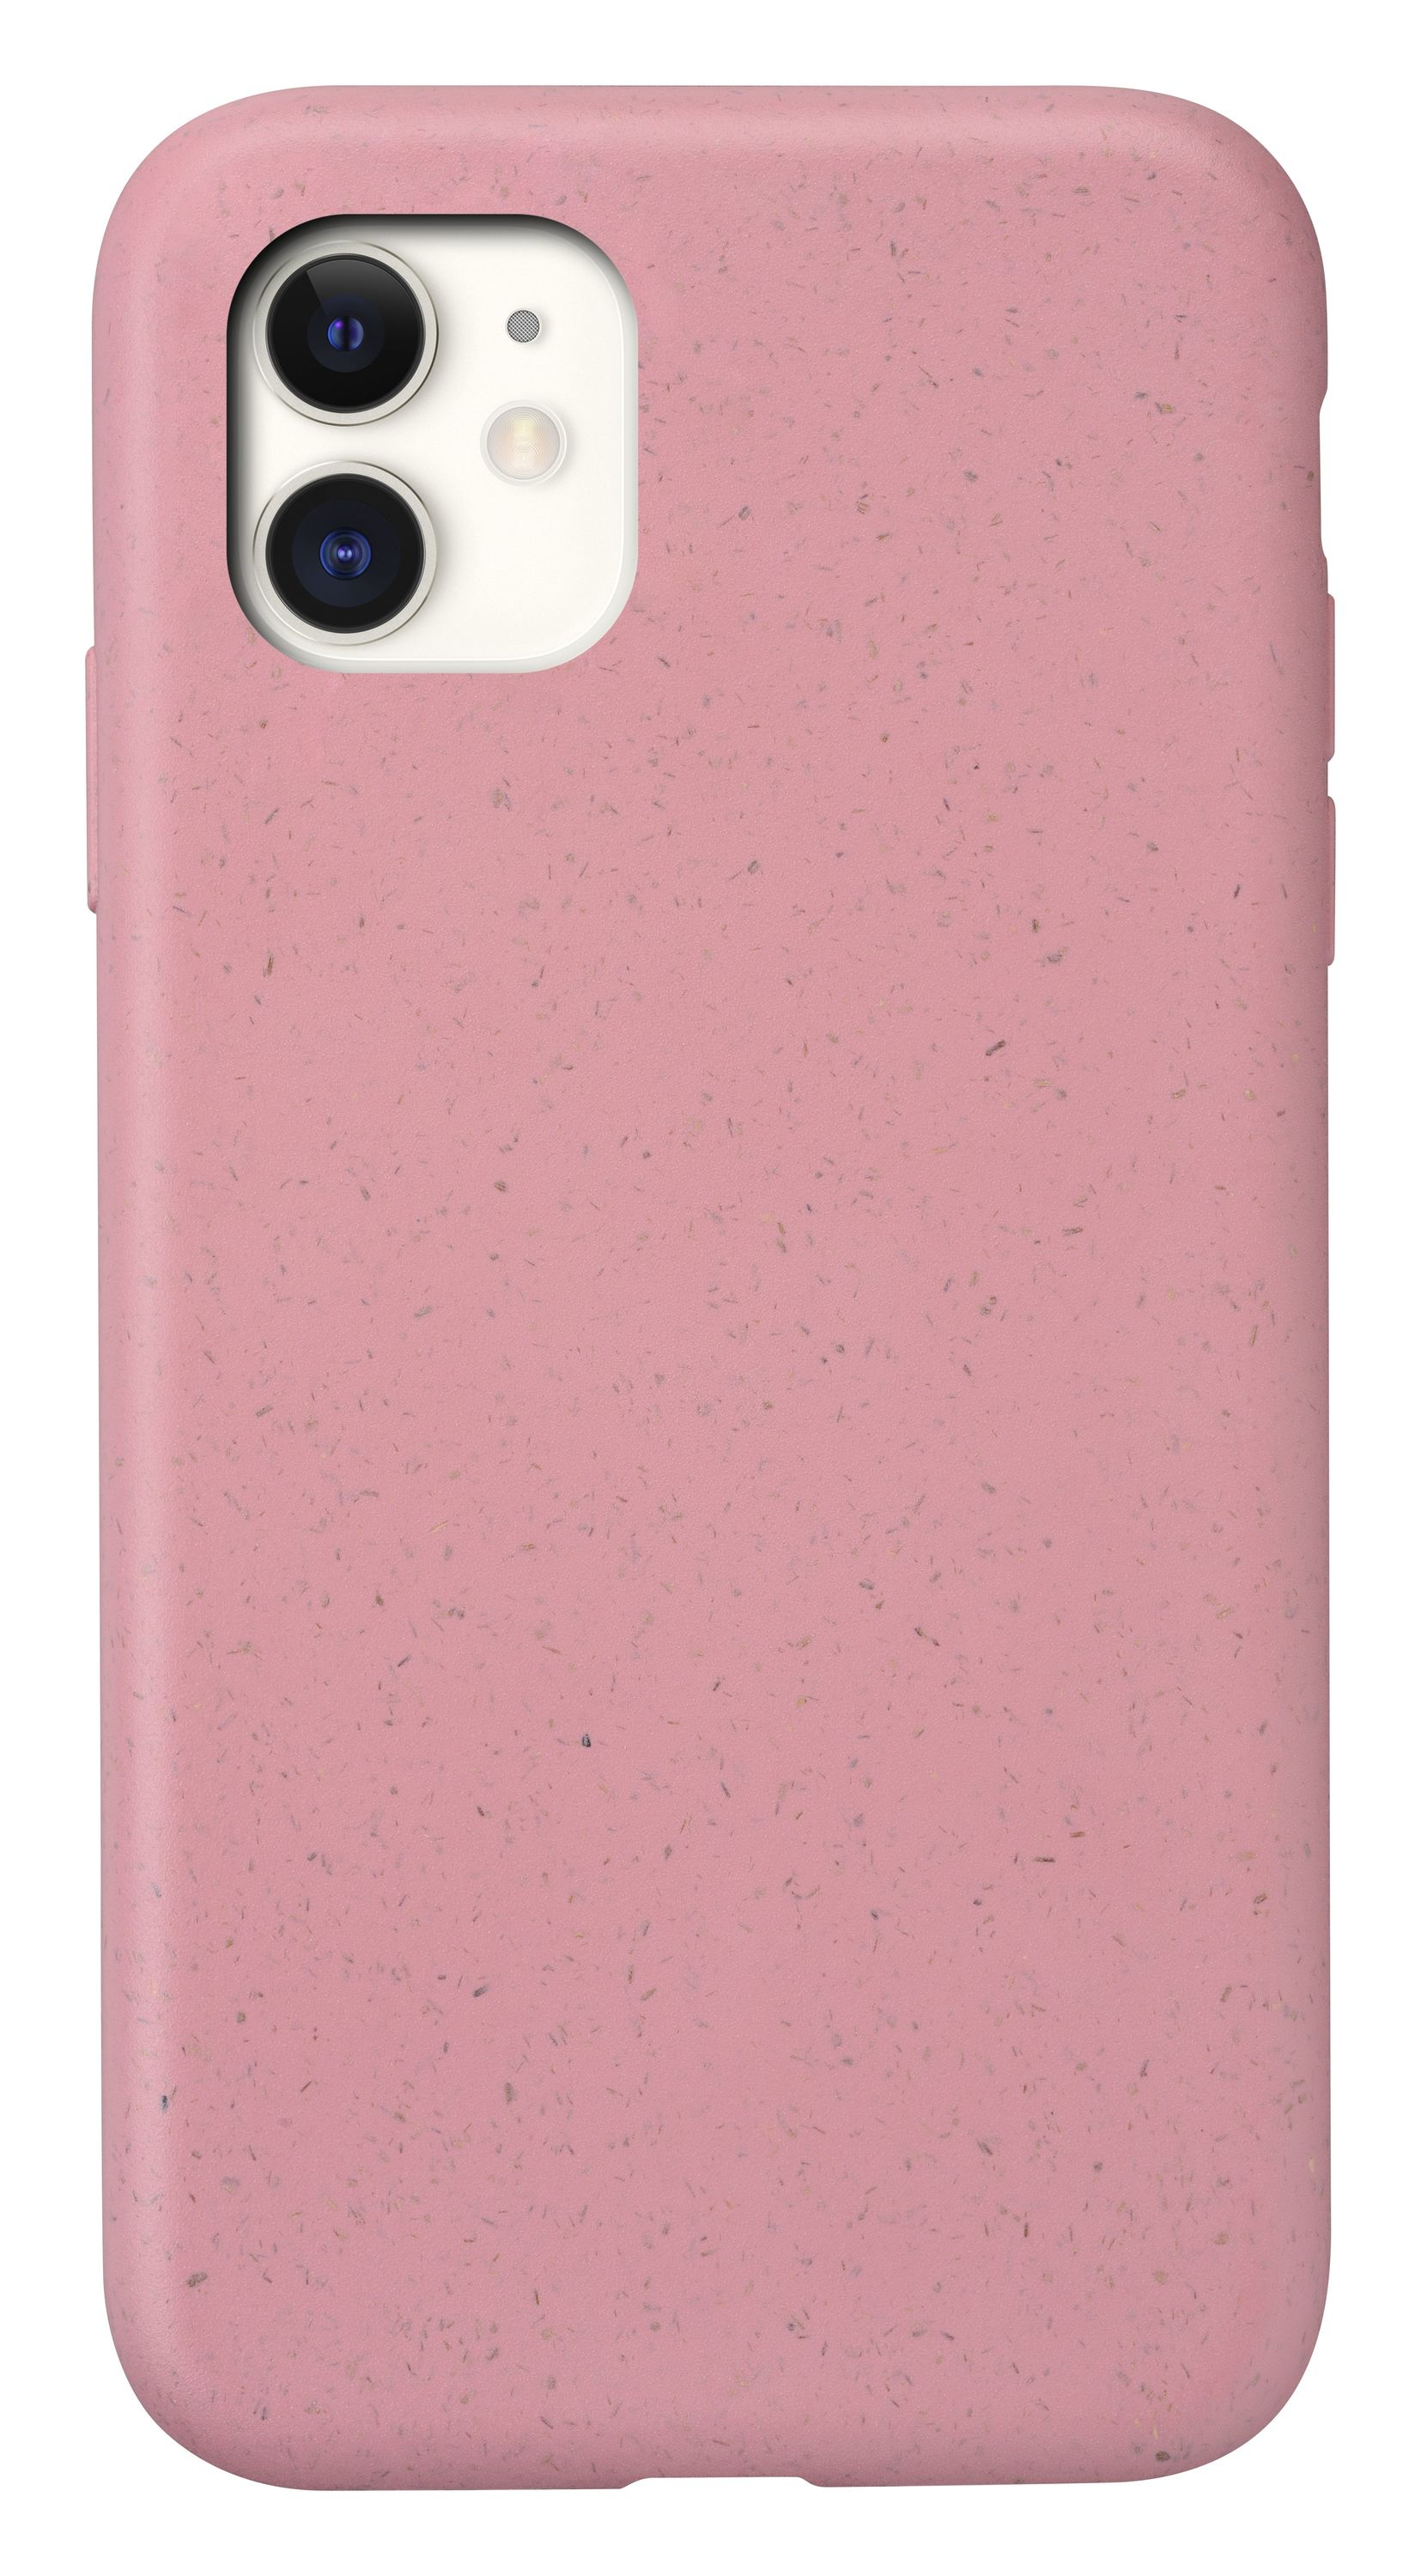 iPhone 11, hoesje become, roze